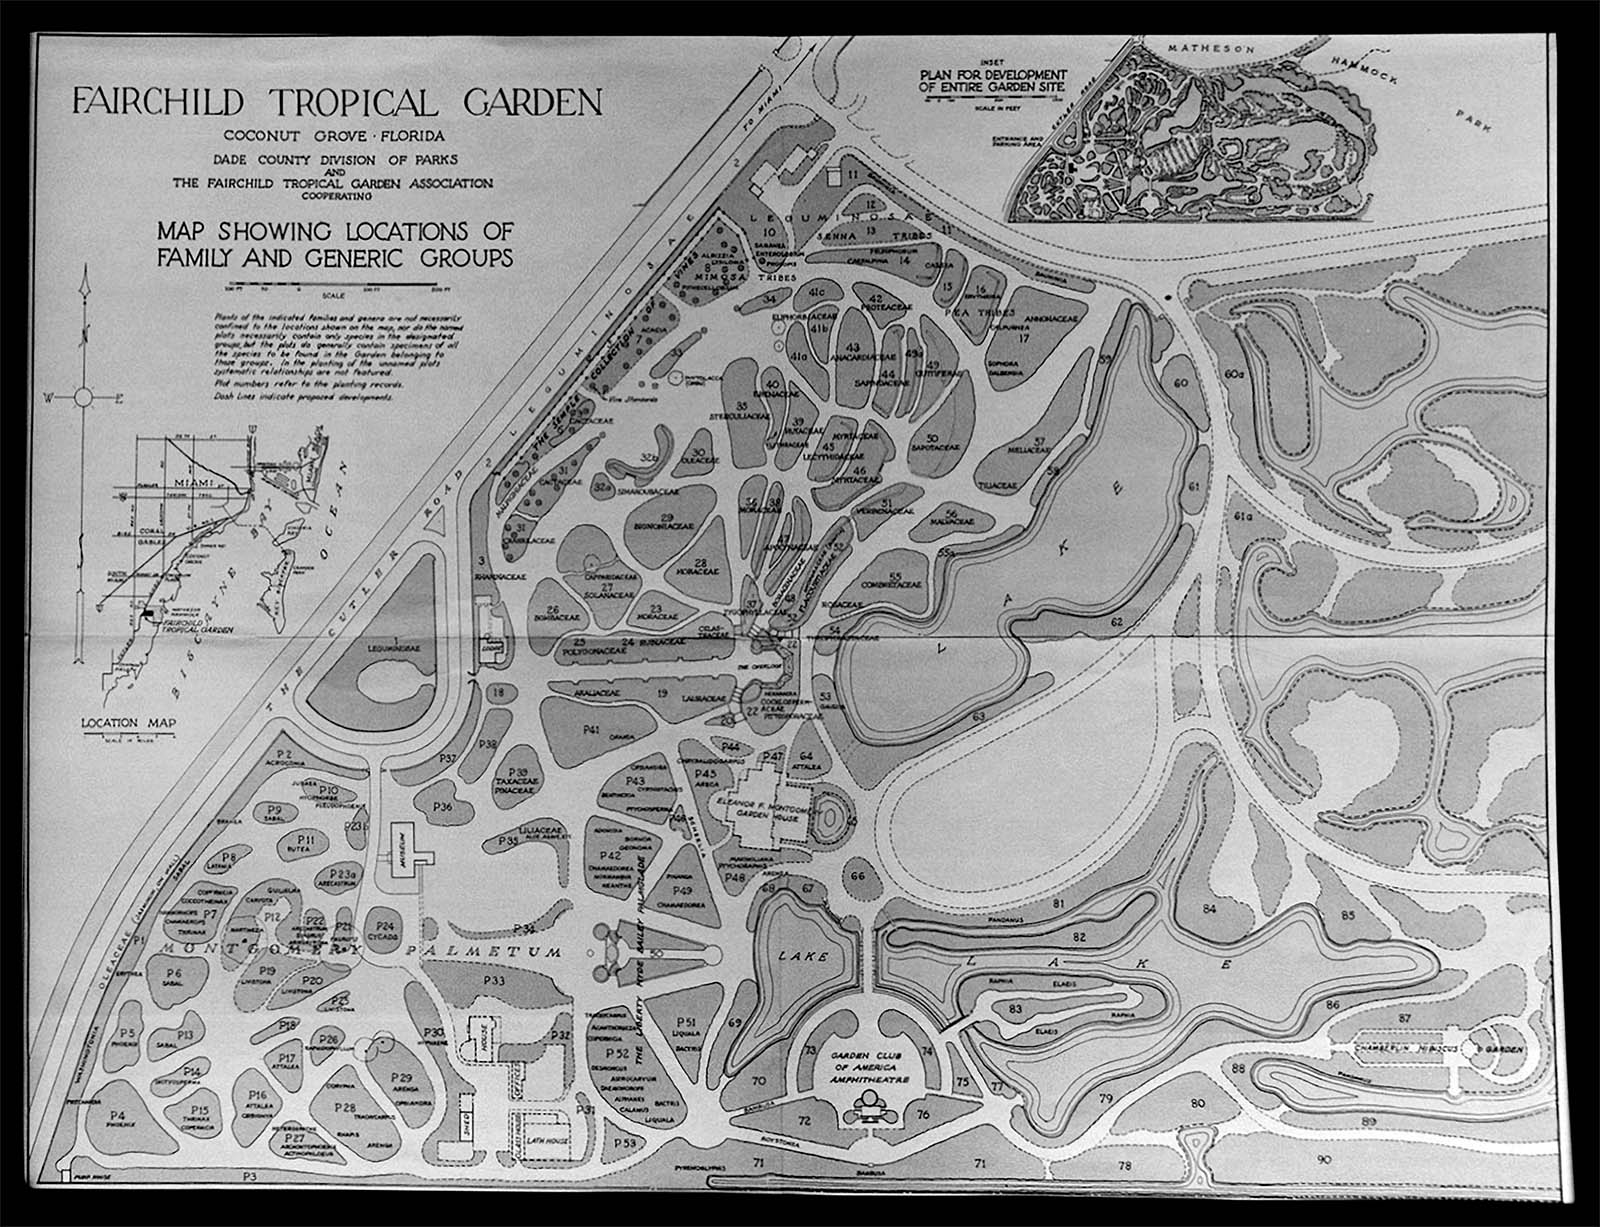 The Fairchild Tropical Garden in Coral Gables, FL, designed by William Lyman Phillips and dedicated to SPI founder and tropical plant enthusiast David Fairchild. This 1943 plan shows the spatial arrangement of plants arranged by family and genera. Inset map on left shows location of Garden in relation to Biscayne Bay. Left: An informal path in the Garden. Source: William Lyman Phillips Papers, Frances Loeb Library Special Collections, Box 1.